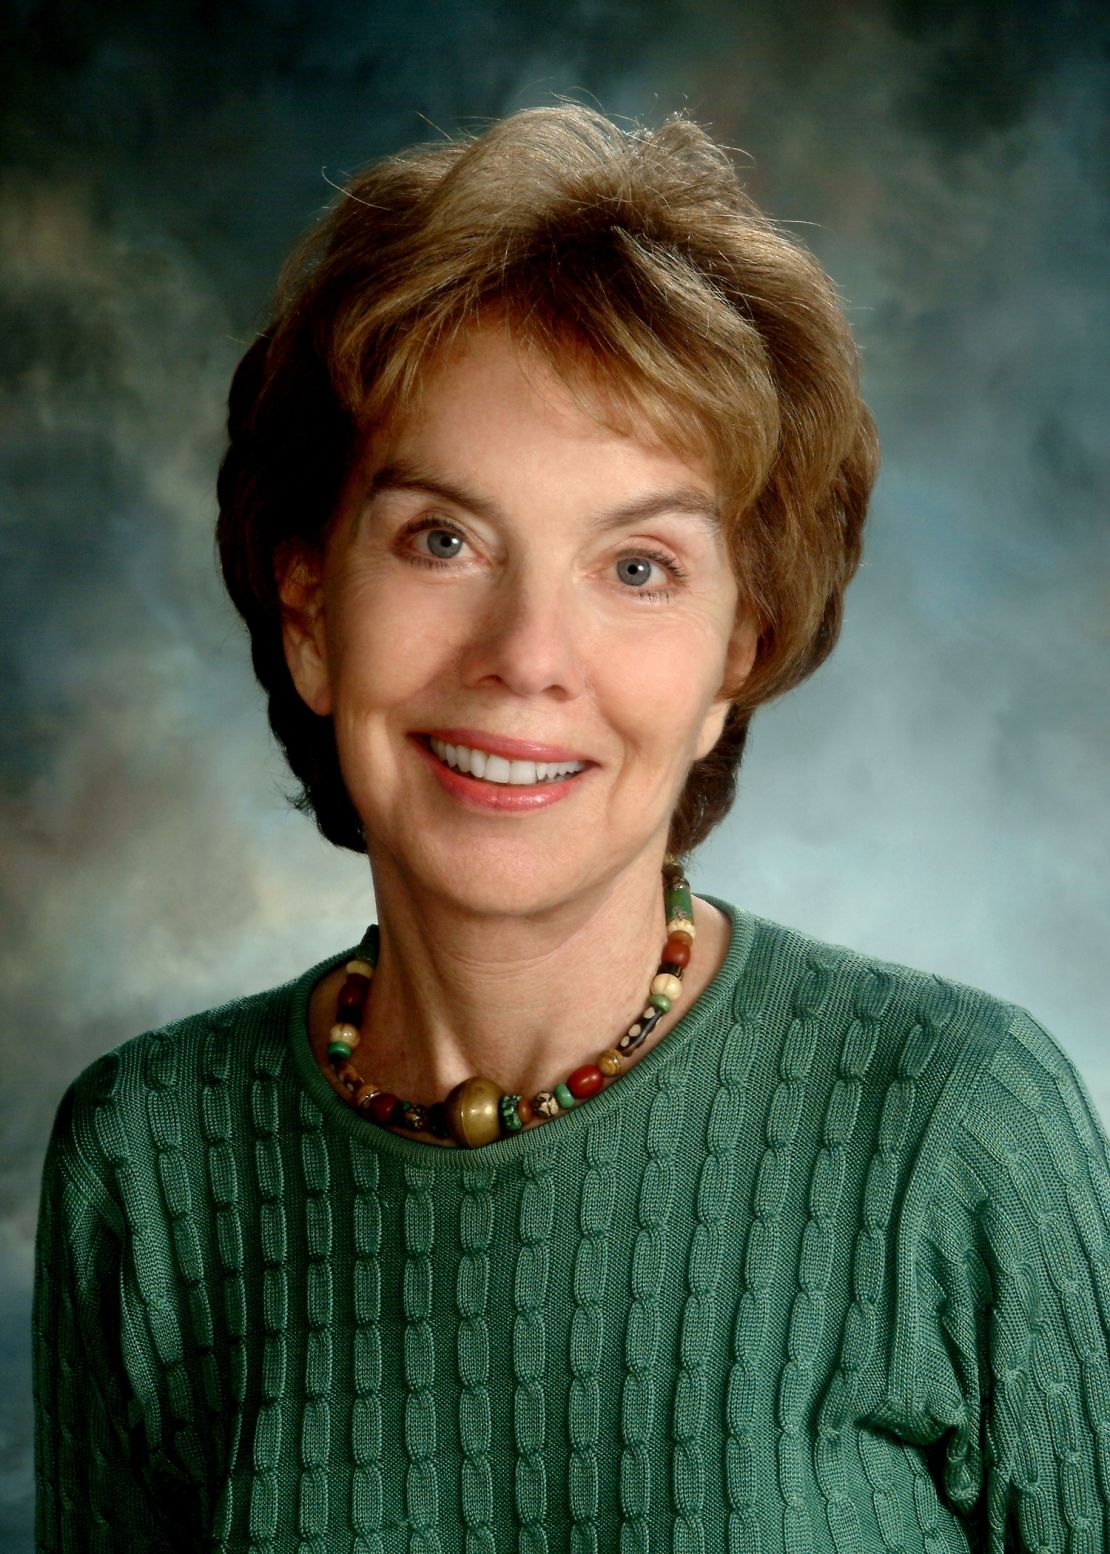 Author Molly Haskell